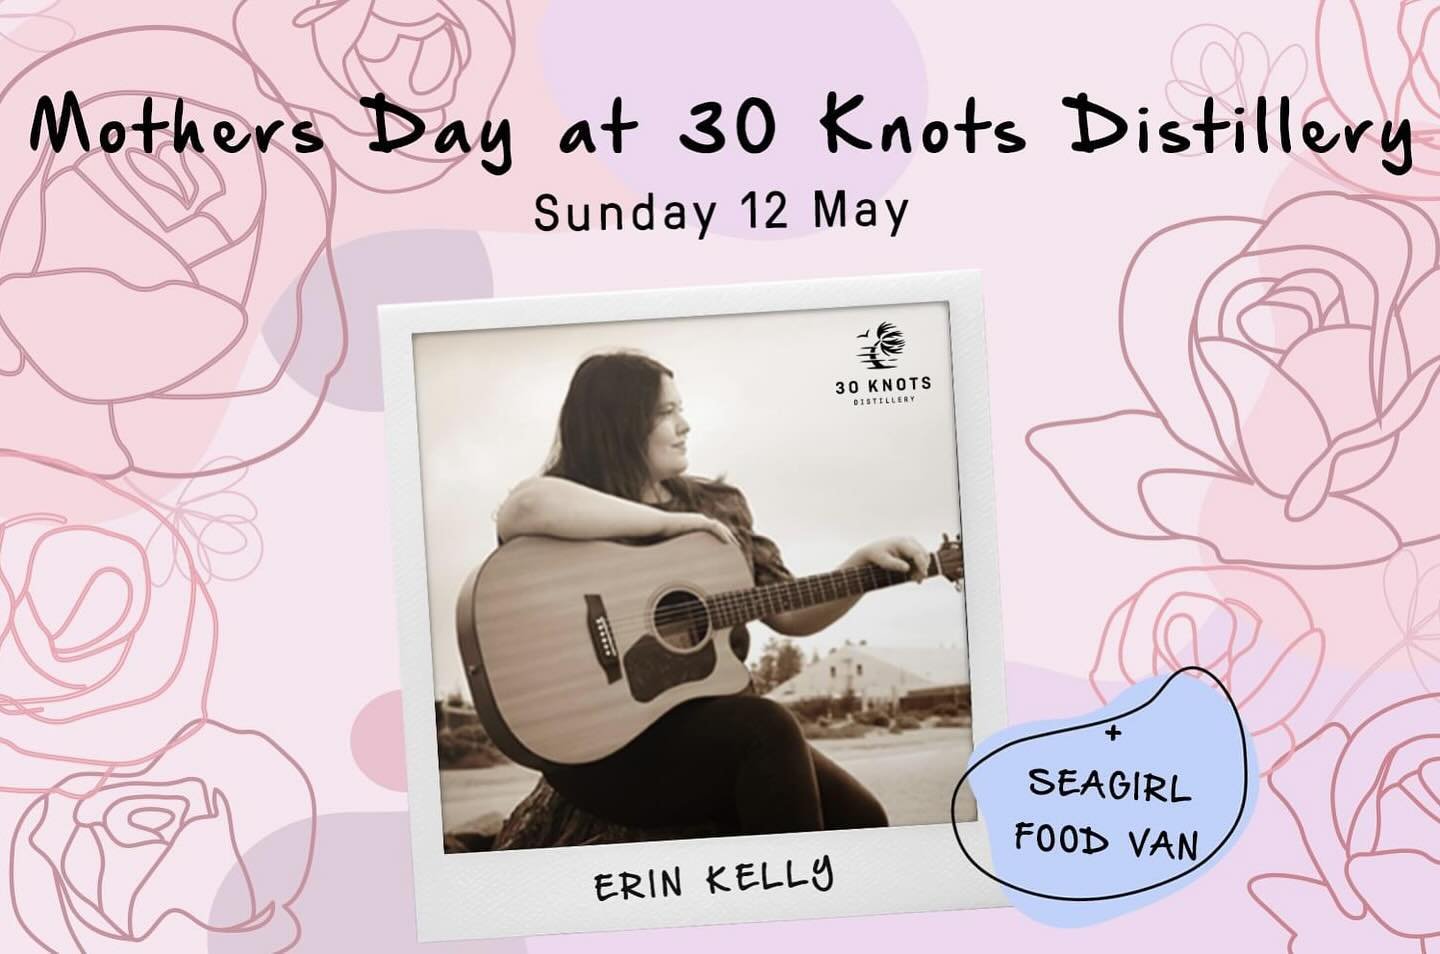 Come join us for Mothers Day, Sunday 12 May, as we celebrate all of the incredible women who have shaped our lives and made us who we are today.

The talented Erin Kelly will be performing live on the deck, and SeaGirl will be serving up some delicio